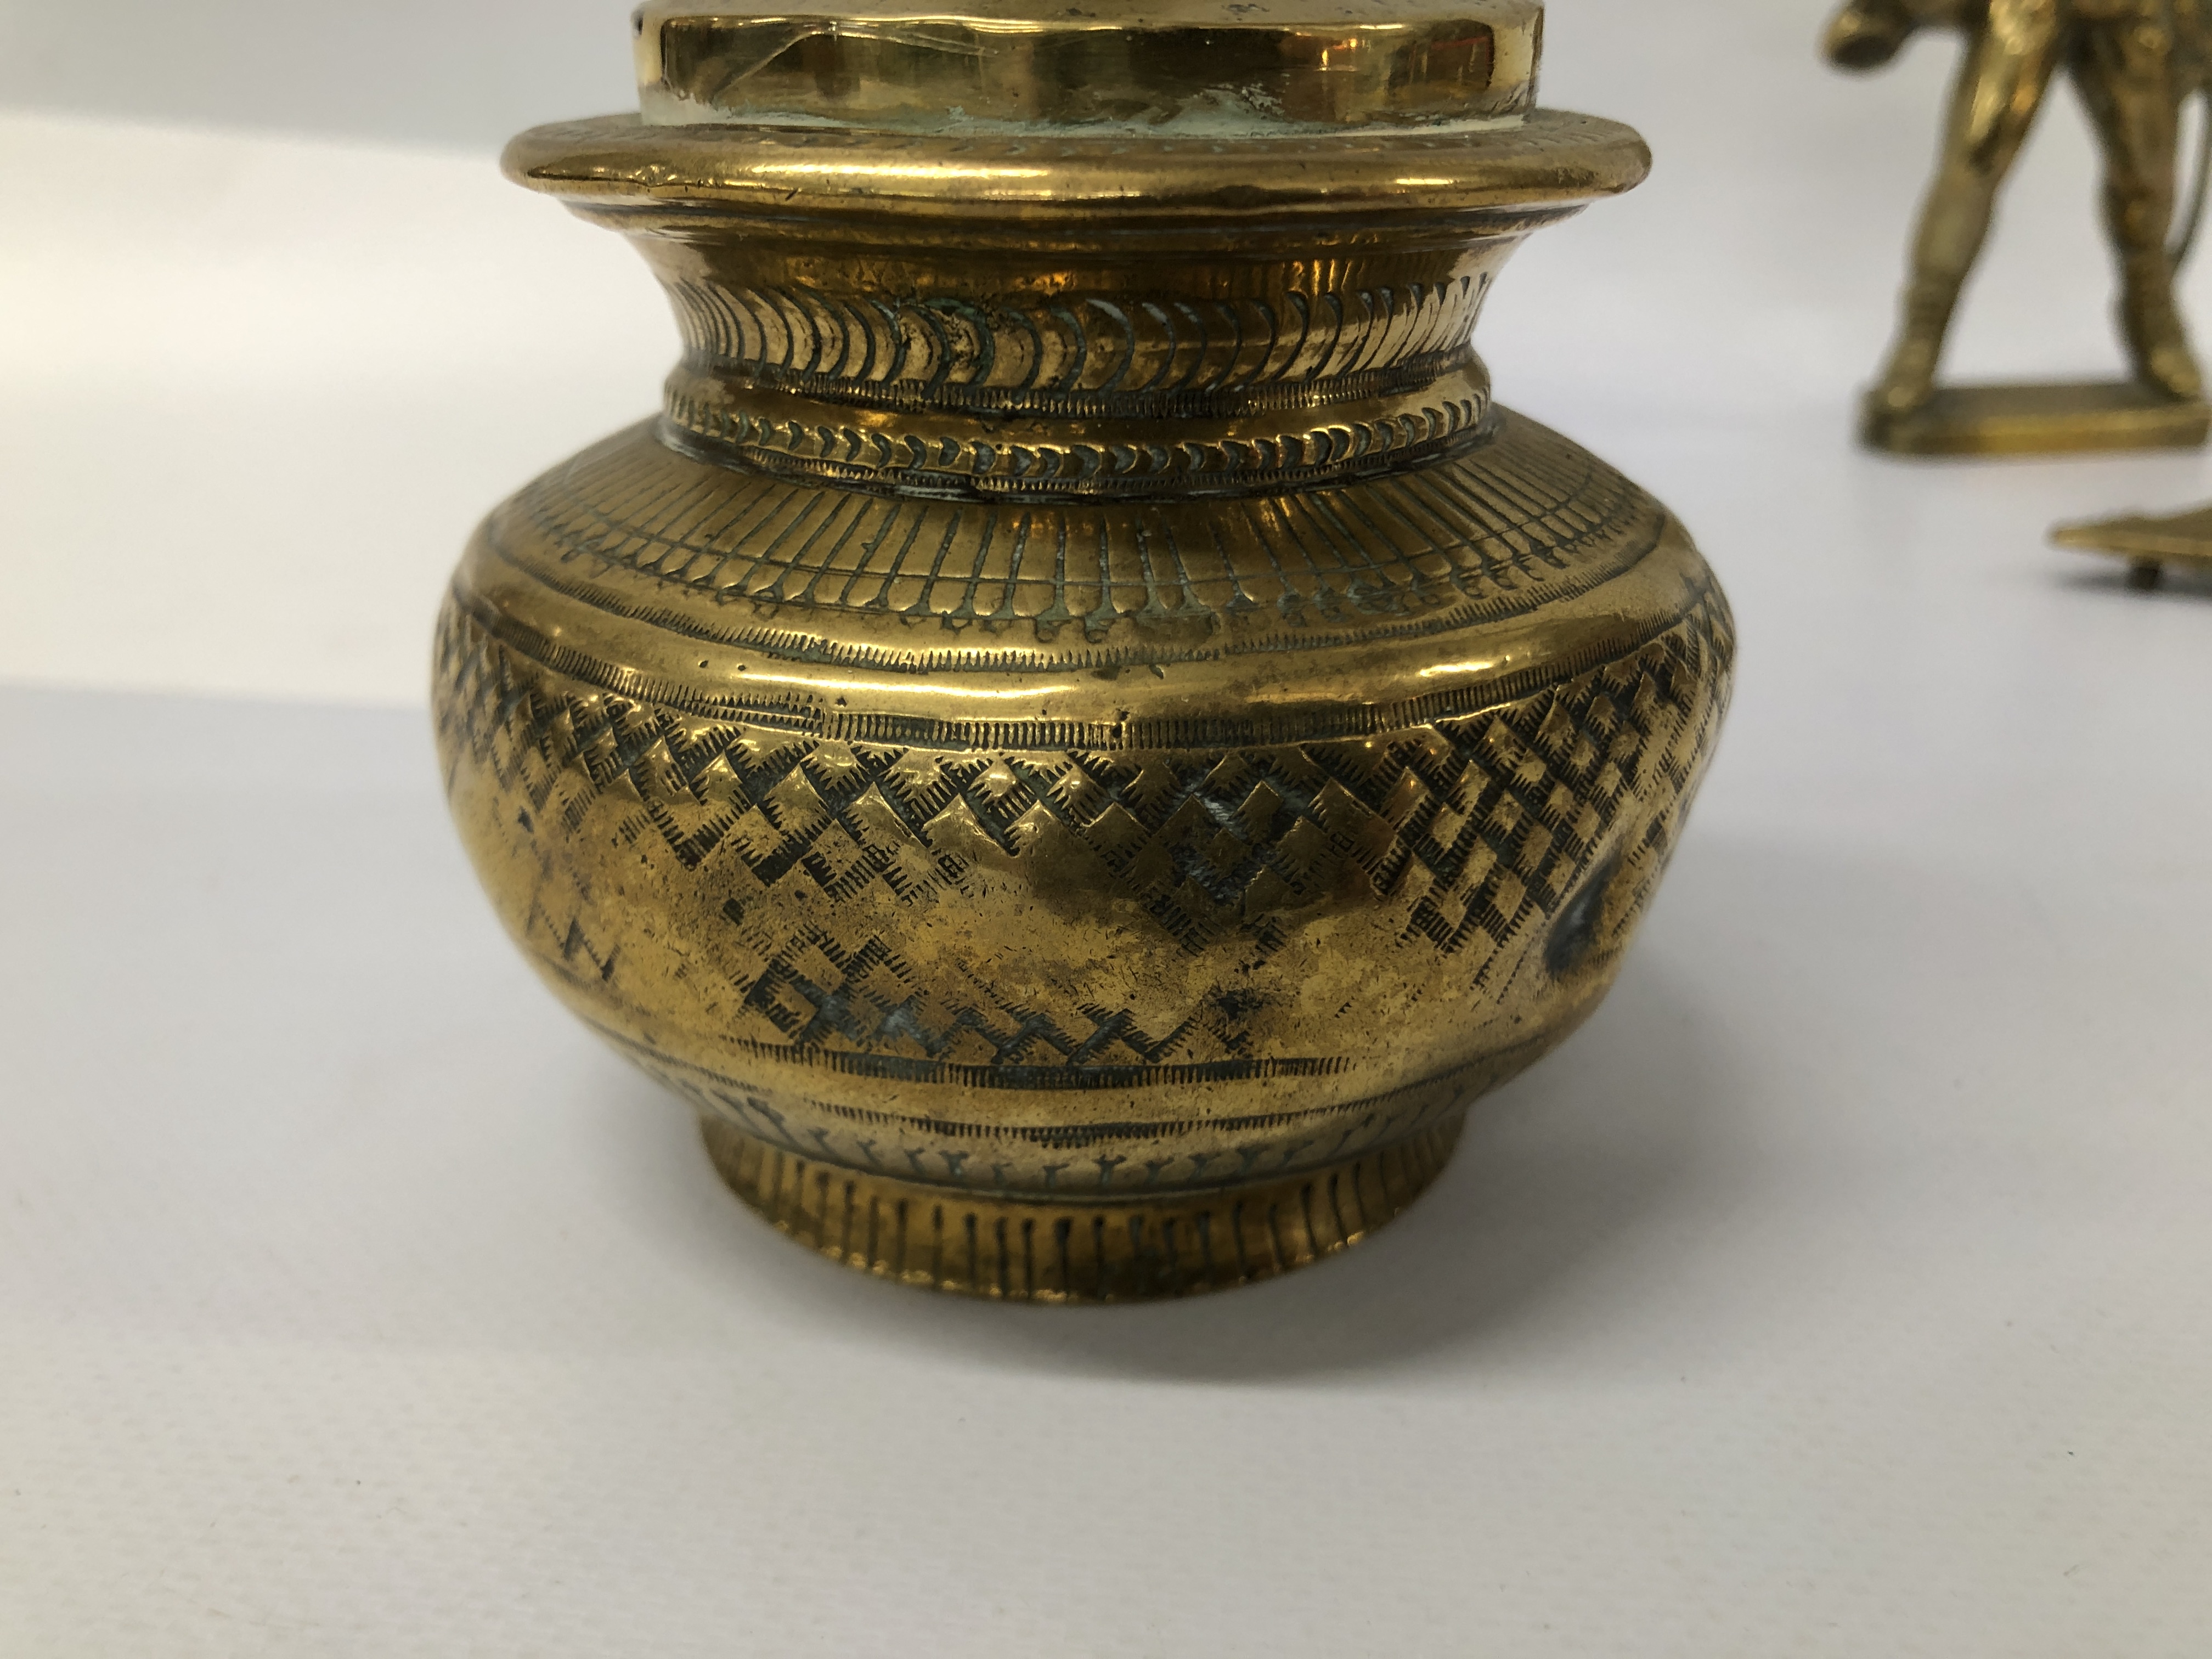 DECORATIVE BRASS INKWELL, HEAVY BRASS KINGFISHER ORNAMENT ON A DECORATIVE ENGRAVED BASE, - Image 4 of 10